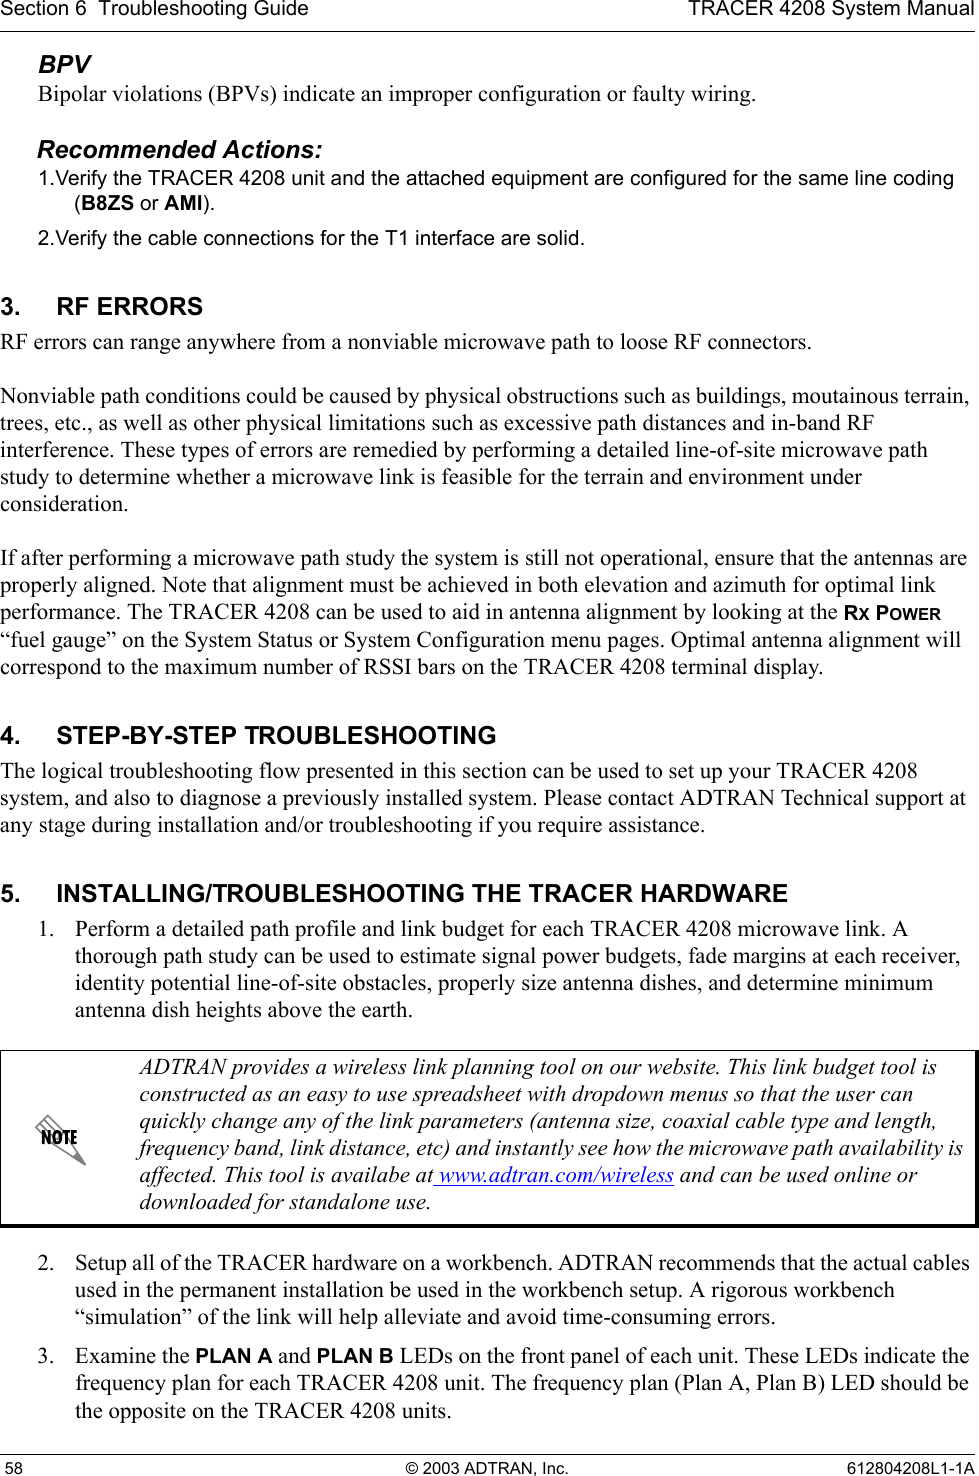 Section 6  Troubleshooting Guide TRACER 4208 System Manual 58 © 2003 ADTRAN, Inc. 612804208L1-1ABPVBipolar violations (BPVs) indicate an improper configuration or faulty wiring.Recommended Actions:1.Verify the TRACER 4208 unit and the attached equipment are configured for the same line coding (B8ZS or AMI).2.Verify the cable connections for the T1 interface are solid.3. RF ERRORSRF errors can range anywhere from a nonviable microwave path to loose RF connectors.Nonviable path conditions could be caused by physical obstructions such as buildings, moutainous terrain, trees, etc., as well as other physical limitations such as excessive path distances and in-band RF interference. These types of errors are remedied by performing a detailed line-of-site microwave path study to determine whether a microwave link is feasible for the terrain and environment under consideration.If after performing a microwave path study the system is still not operational, ensure that the antennas are properly aligned. Note that alignment must be achieved in both elevation and azimuth for optimal link performance. The TRACER 4208 can be used to aid in antenna alignment by looking at the RX POWER “fuel gauge” on the System Status or System Configuration menu pages. Optimal antenna alignment will correspond to the maximum number of RSSI bars on the TRACER 4208 terminal display.4. STEP-BY-STEP TROUBLESHOOTINGThe logical troubleshooting flow presented in this section can be used to set up your TRACER 4208 system, and also to diagnose a previously installed system. Please contact ADTRAN Technical support at any stage during installation and/or troubleshooting if you require assistance.5. INSTALLING/TROUBLESHOOTING THE TRACER HARDWARE1. Perform a detailed path profile and link budget for each TRACER 4208 microwave link. A thorough path study can be used to estimate signal power budgets, fade margins at each receiver, identity potential line-of-site obstacles, properly size antenna dishes, and determine minimum antenna dish heights above the earth.2. Setup all of the TRACER hardware on a workbench. ADTRAN recommends that the actual cables used in the permanent installation be used in the workbench setup. A rigorous workbench “simulation” of the link will help alleviate and avoid time-consuming errors.3. Examine the PLAN A and PLAN B LEDs on the front panel of each unit. These LEDs indicate the frequency plan for each TRACER 4208 unit. The frequency plan (Plan A, Plan B) LED should be the opposite on the TRACER 4208 units. ADTRAN provides a wireless link planning tool on our website. This link budget tool is constructed as an easy to use spreadsheet with dropdown menus so that the user can quickly change any of the link parameters (antenna size, coaxial cable type and length, frequency band, link distance, etc) and instantly see how the microwave path availability is affected. This tool is availabe at www.adtran.com/wireless and can be used online or downloaded for standalone use.